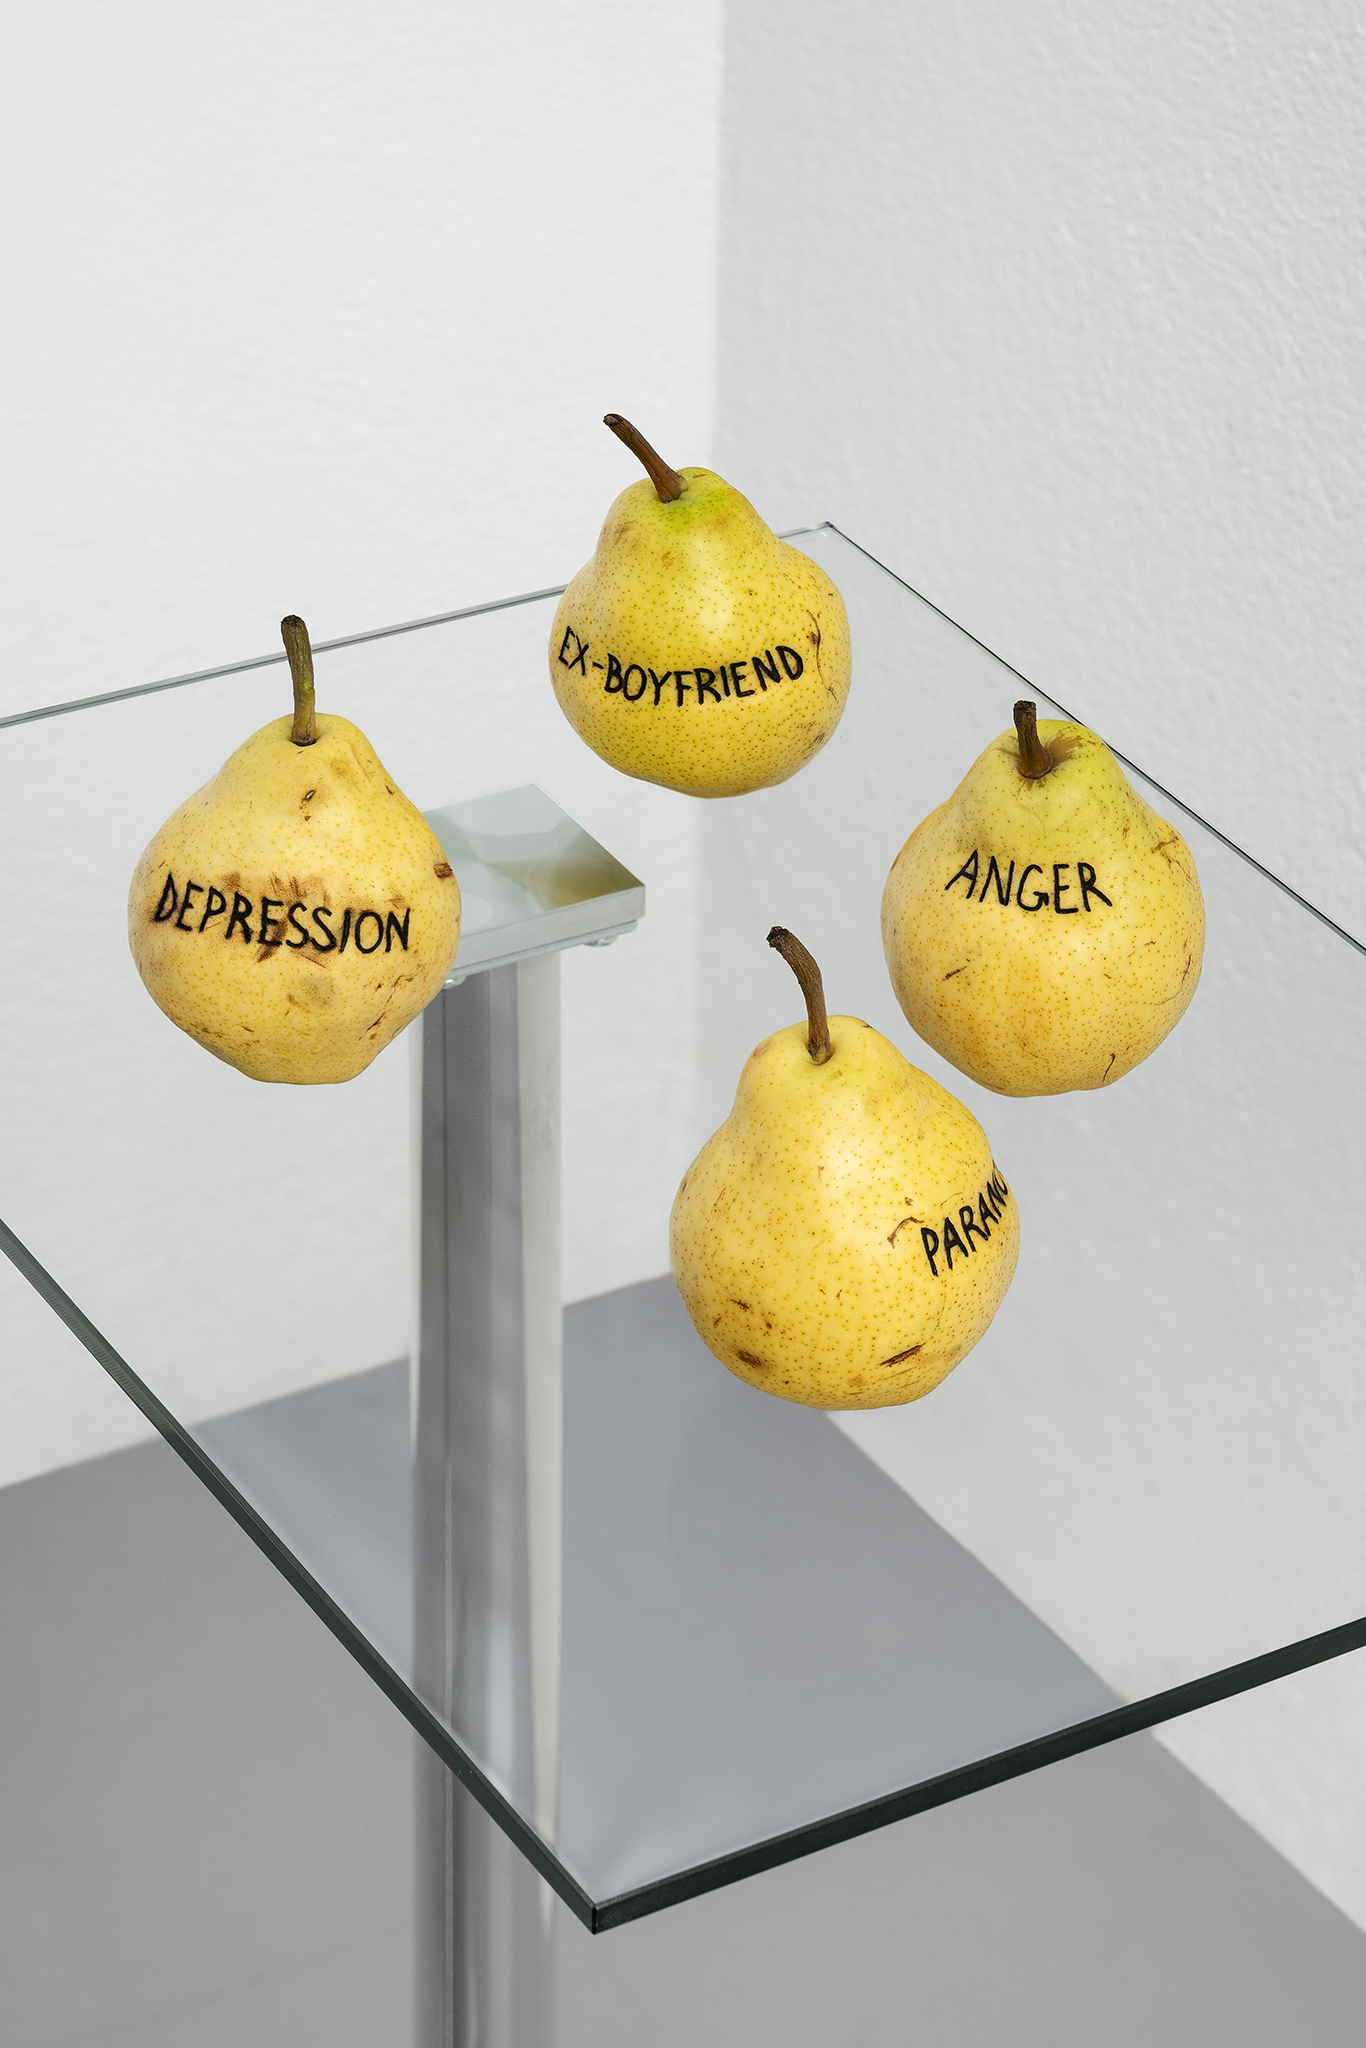 Detail of Paolo Bufalini, Anger, Ex-boyfriend, Depression, Paranoia, 2023. Glass and steel table, tattooed Kaiser pears, 75x34x50cm Courtesy of the Artist and La Rada, Locarno. Photography by Tiziano Ercoli & Riccardo Giancola